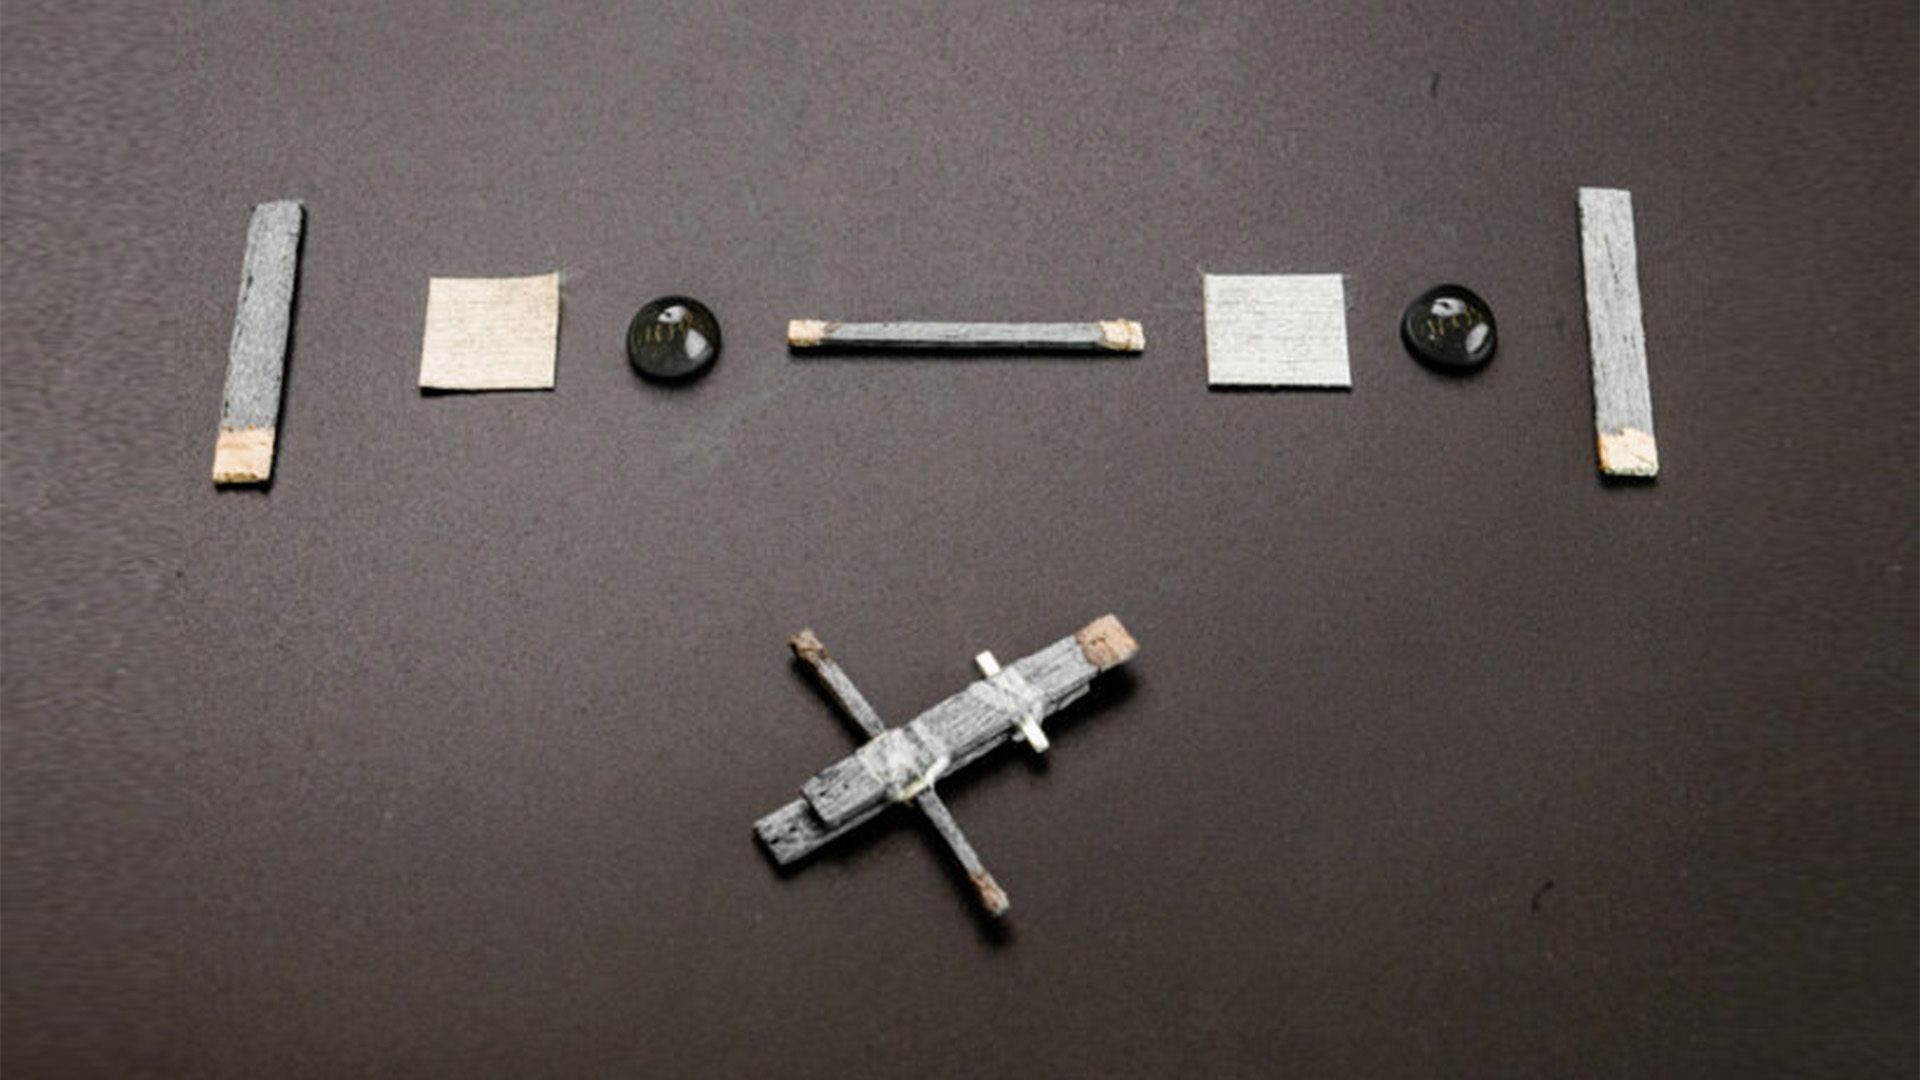 The components of the wood transistor